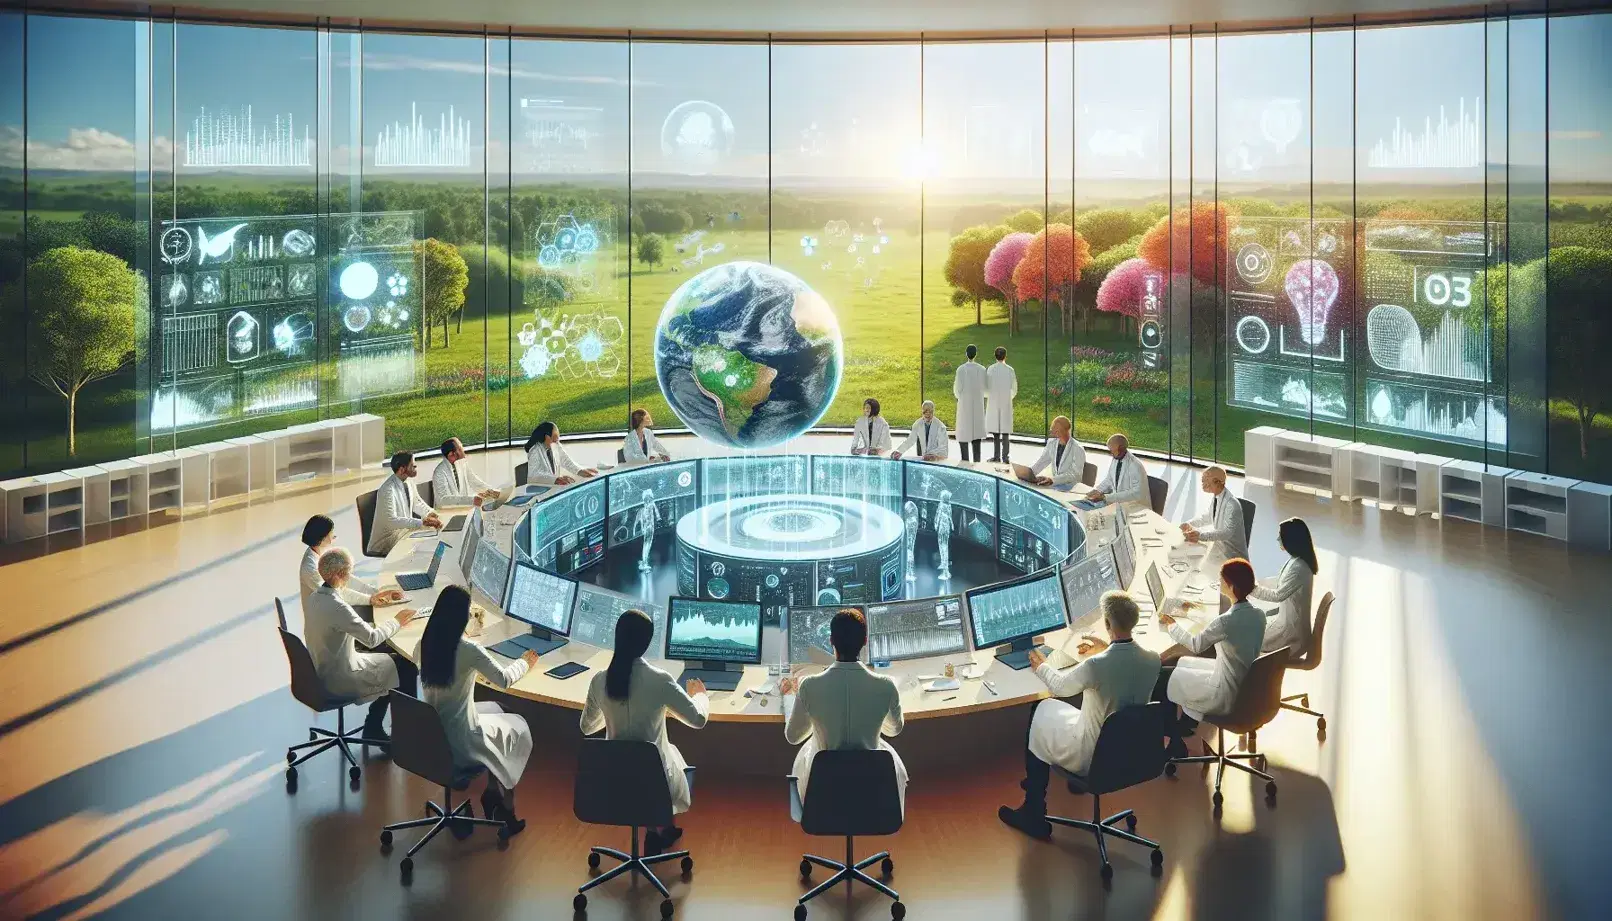 Group of multi-ethnic scientists in a modern conference room with technological devices, analyze a 3D globe, overlooking a green landscape.